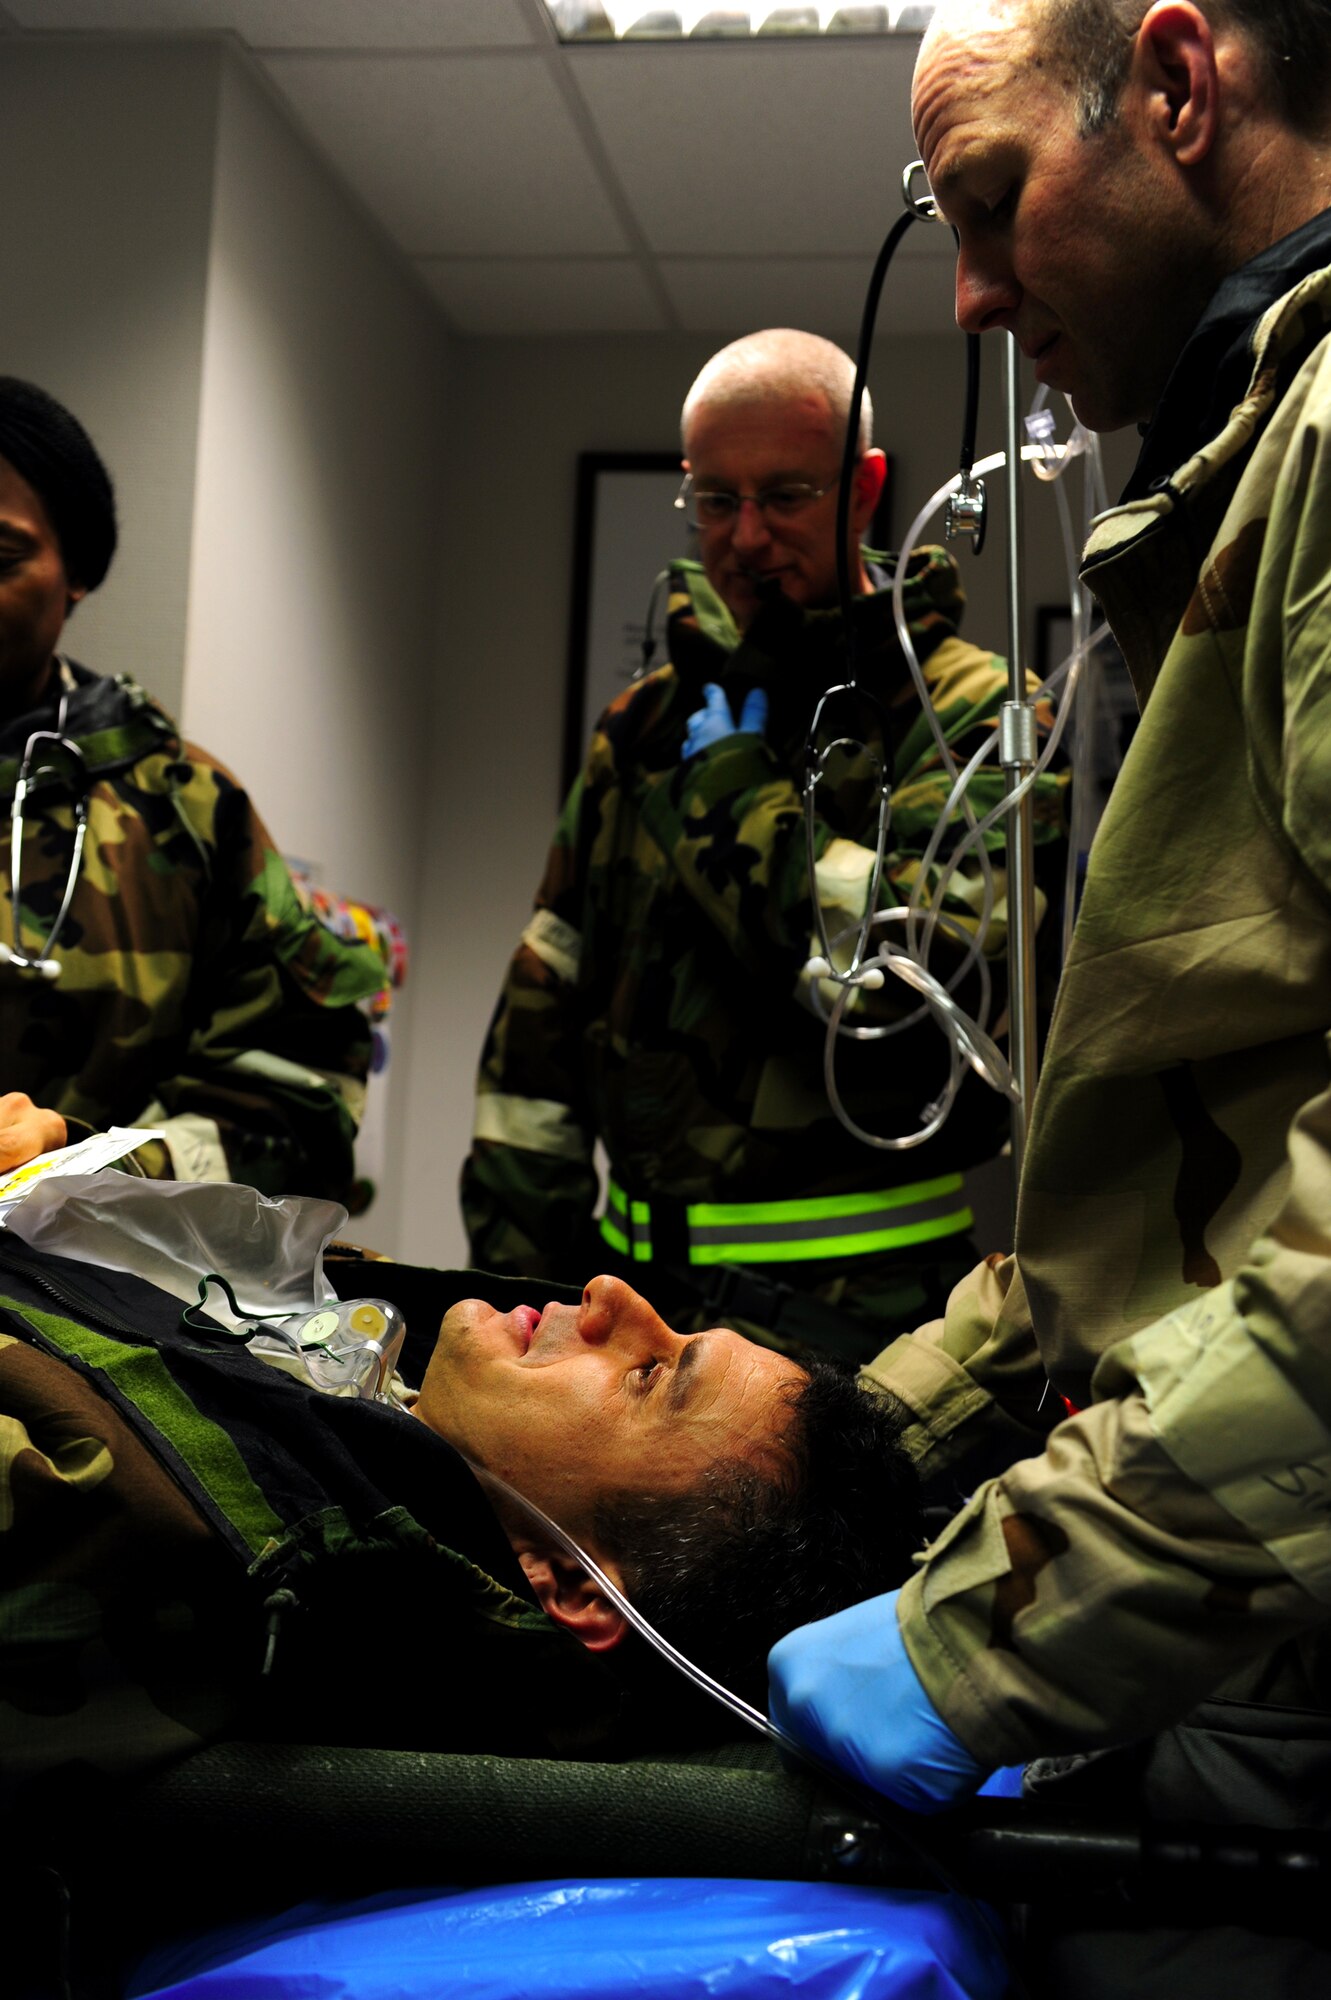 U.S. Air Force Airmen from the 86th Medical Group stabilize a patient during an operational readiness inspection, Ramstein Air Base, Germany, Oct. 3, 2010. The ORI is designed to test Airmen's ability to survive, operate and perform fundamental duties in a war time environment. (U.S. Air Force photo by Airman 1st Class Brea Miller/Released) 